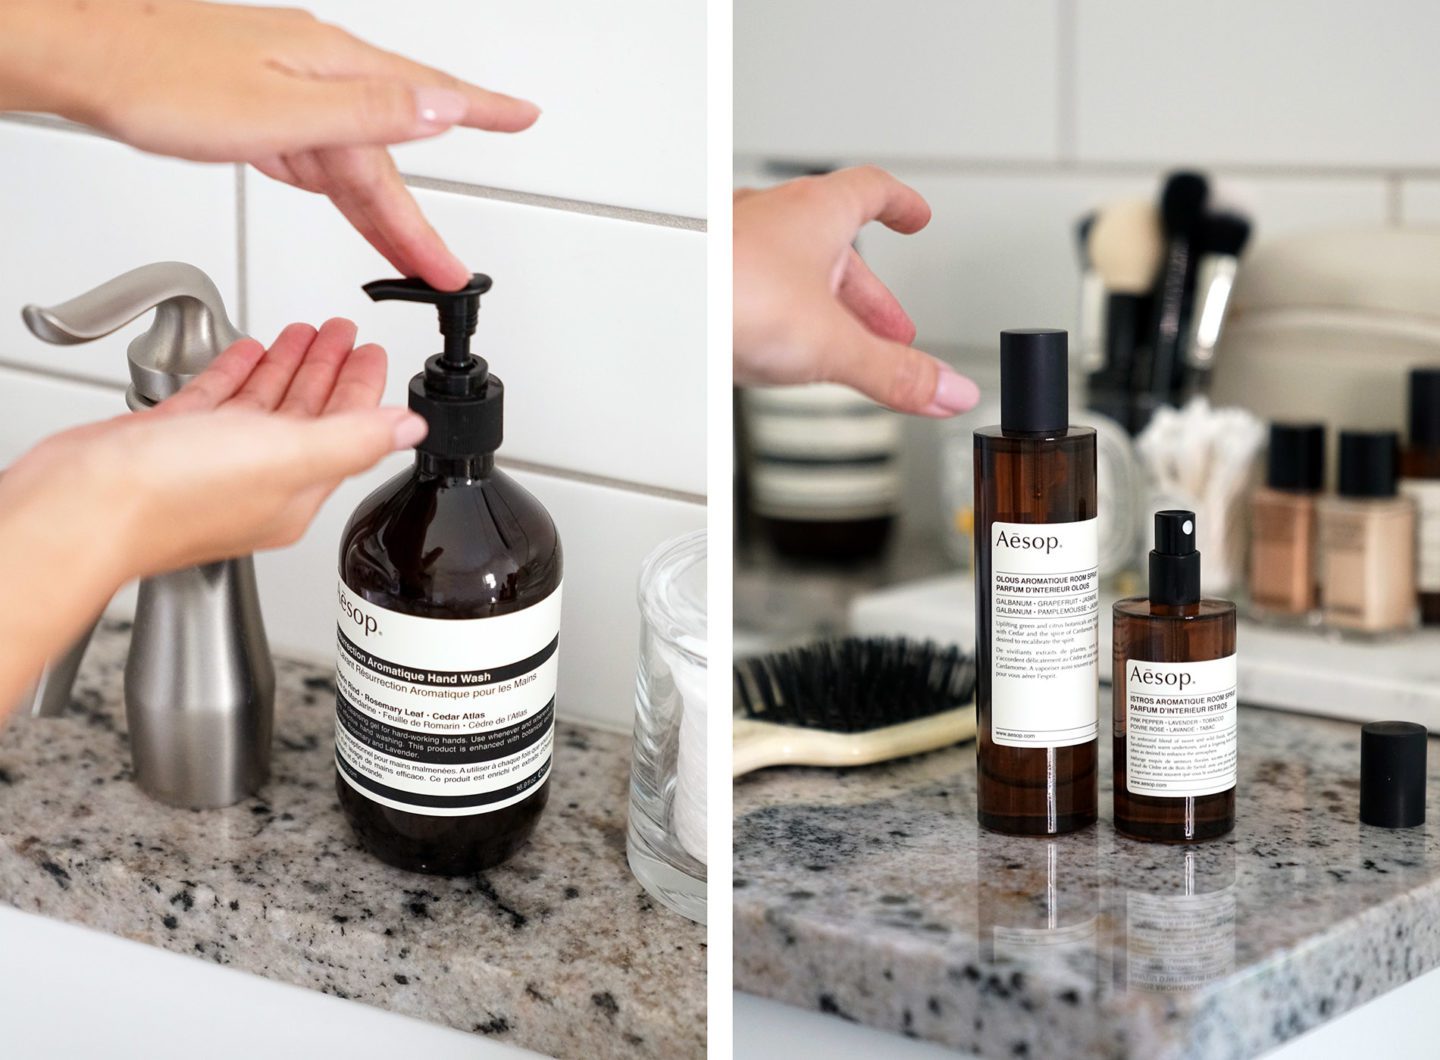 Aesop Hand Wash and Room Spray